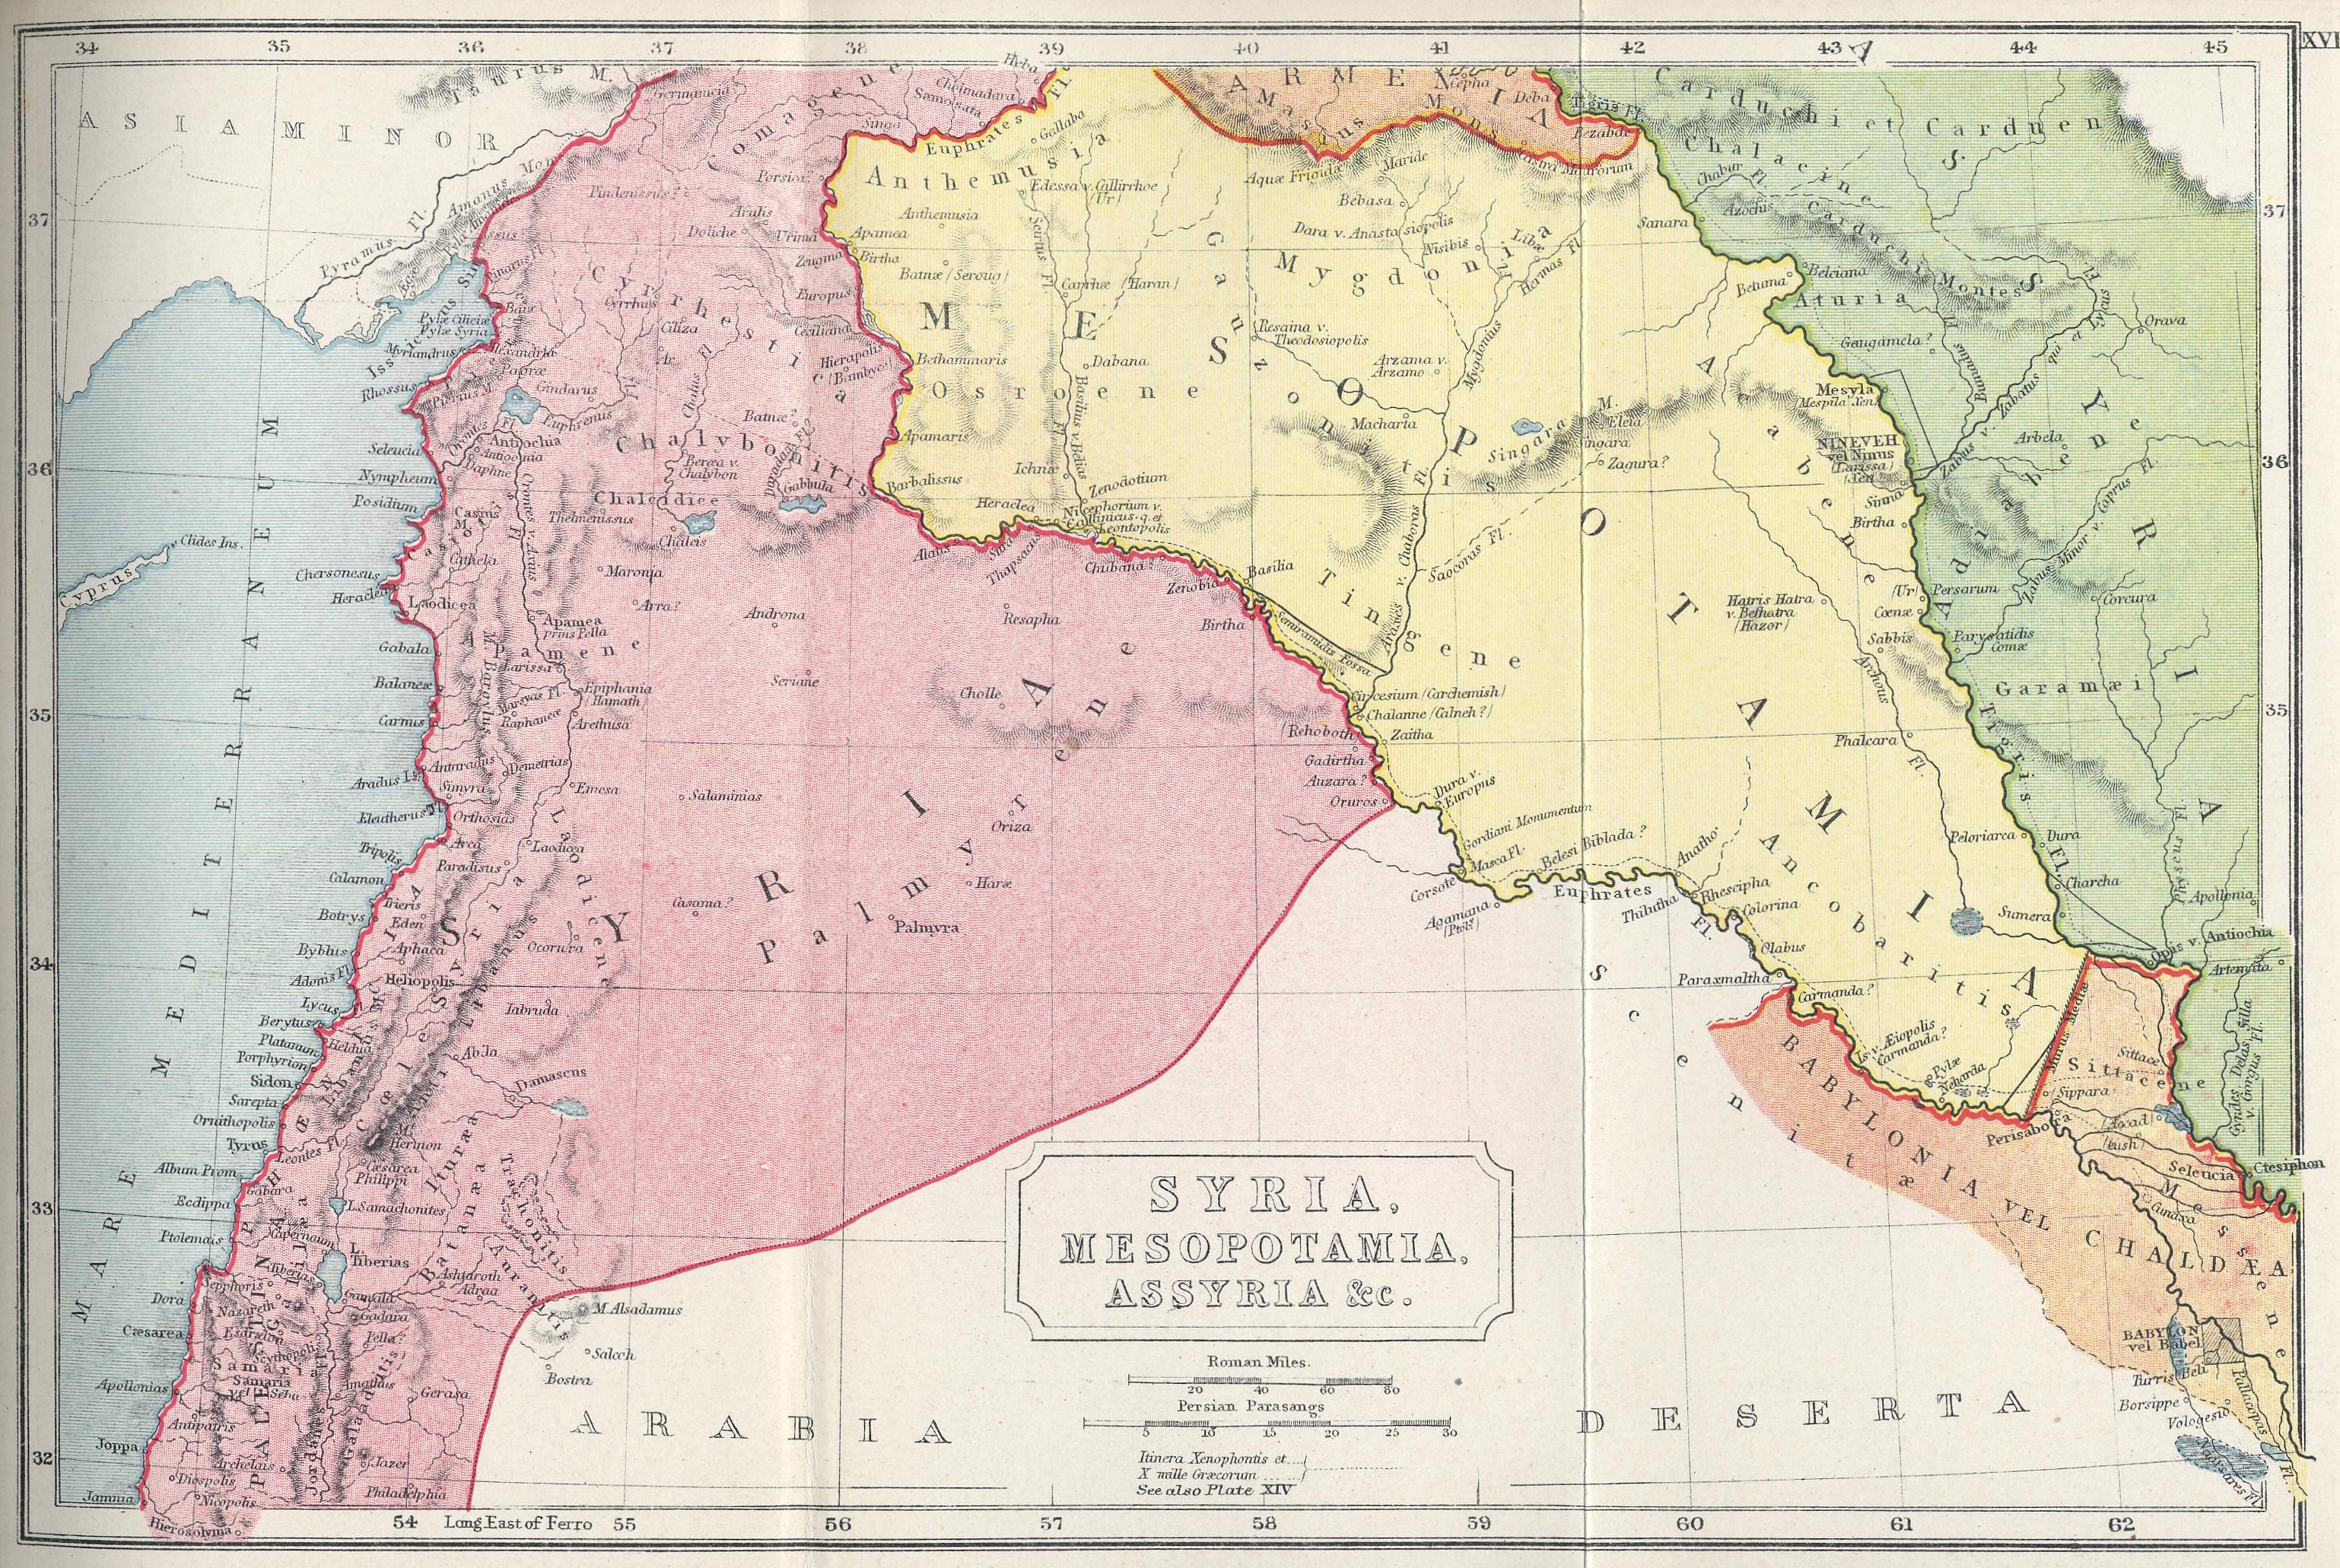 Map of Syria and Mesopotamia70 BC - AD 180